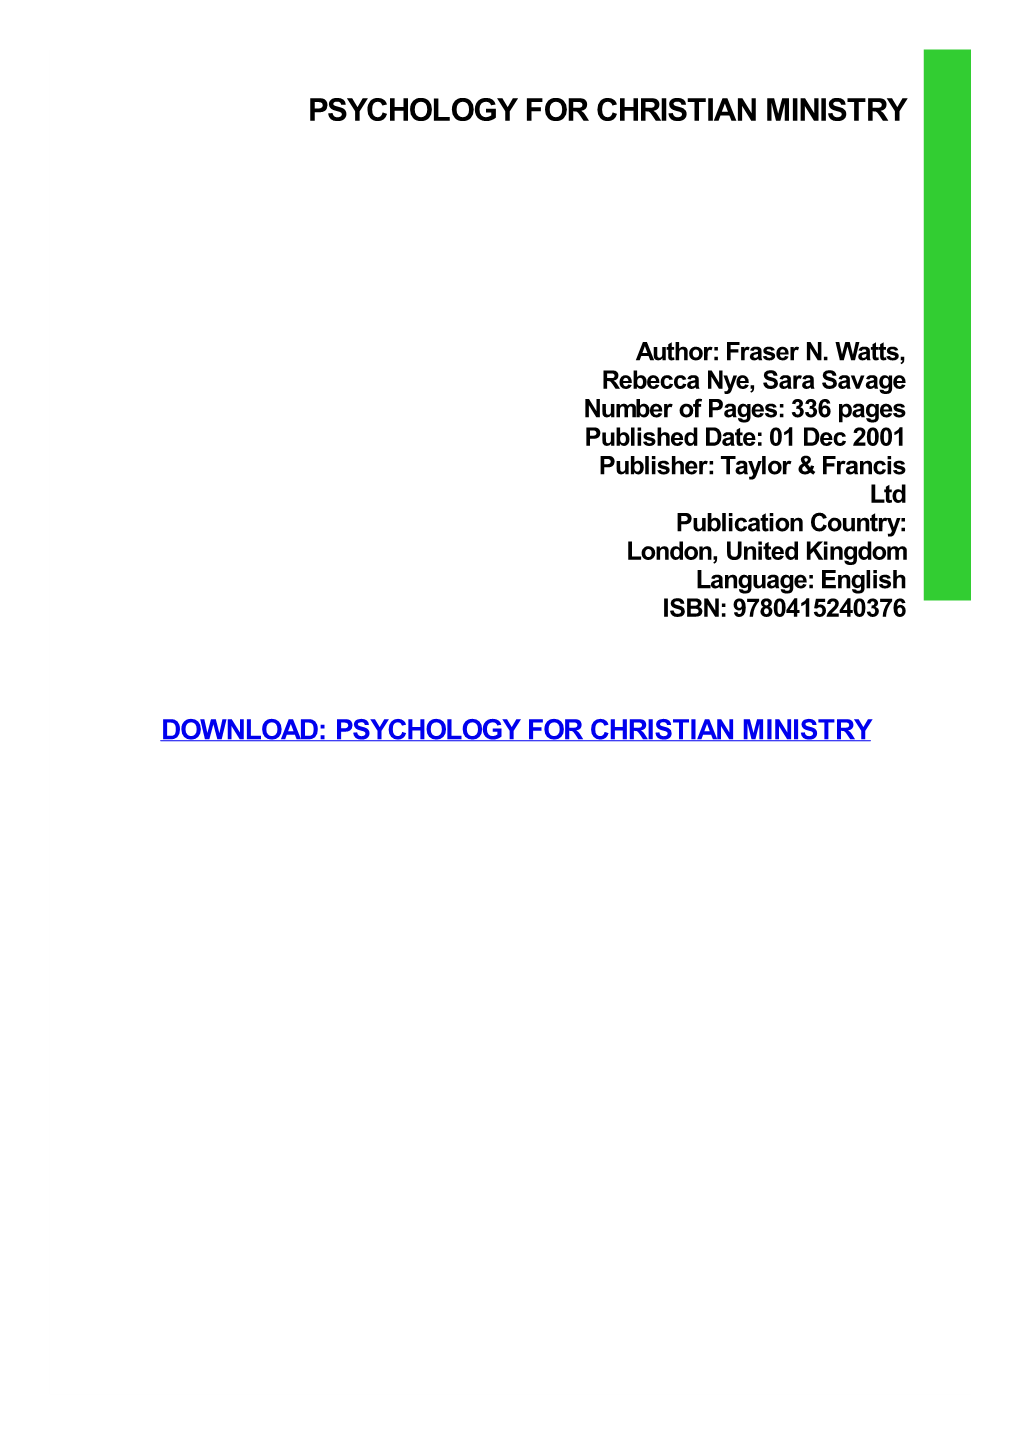 Psychology for Christian Ministry Download Free